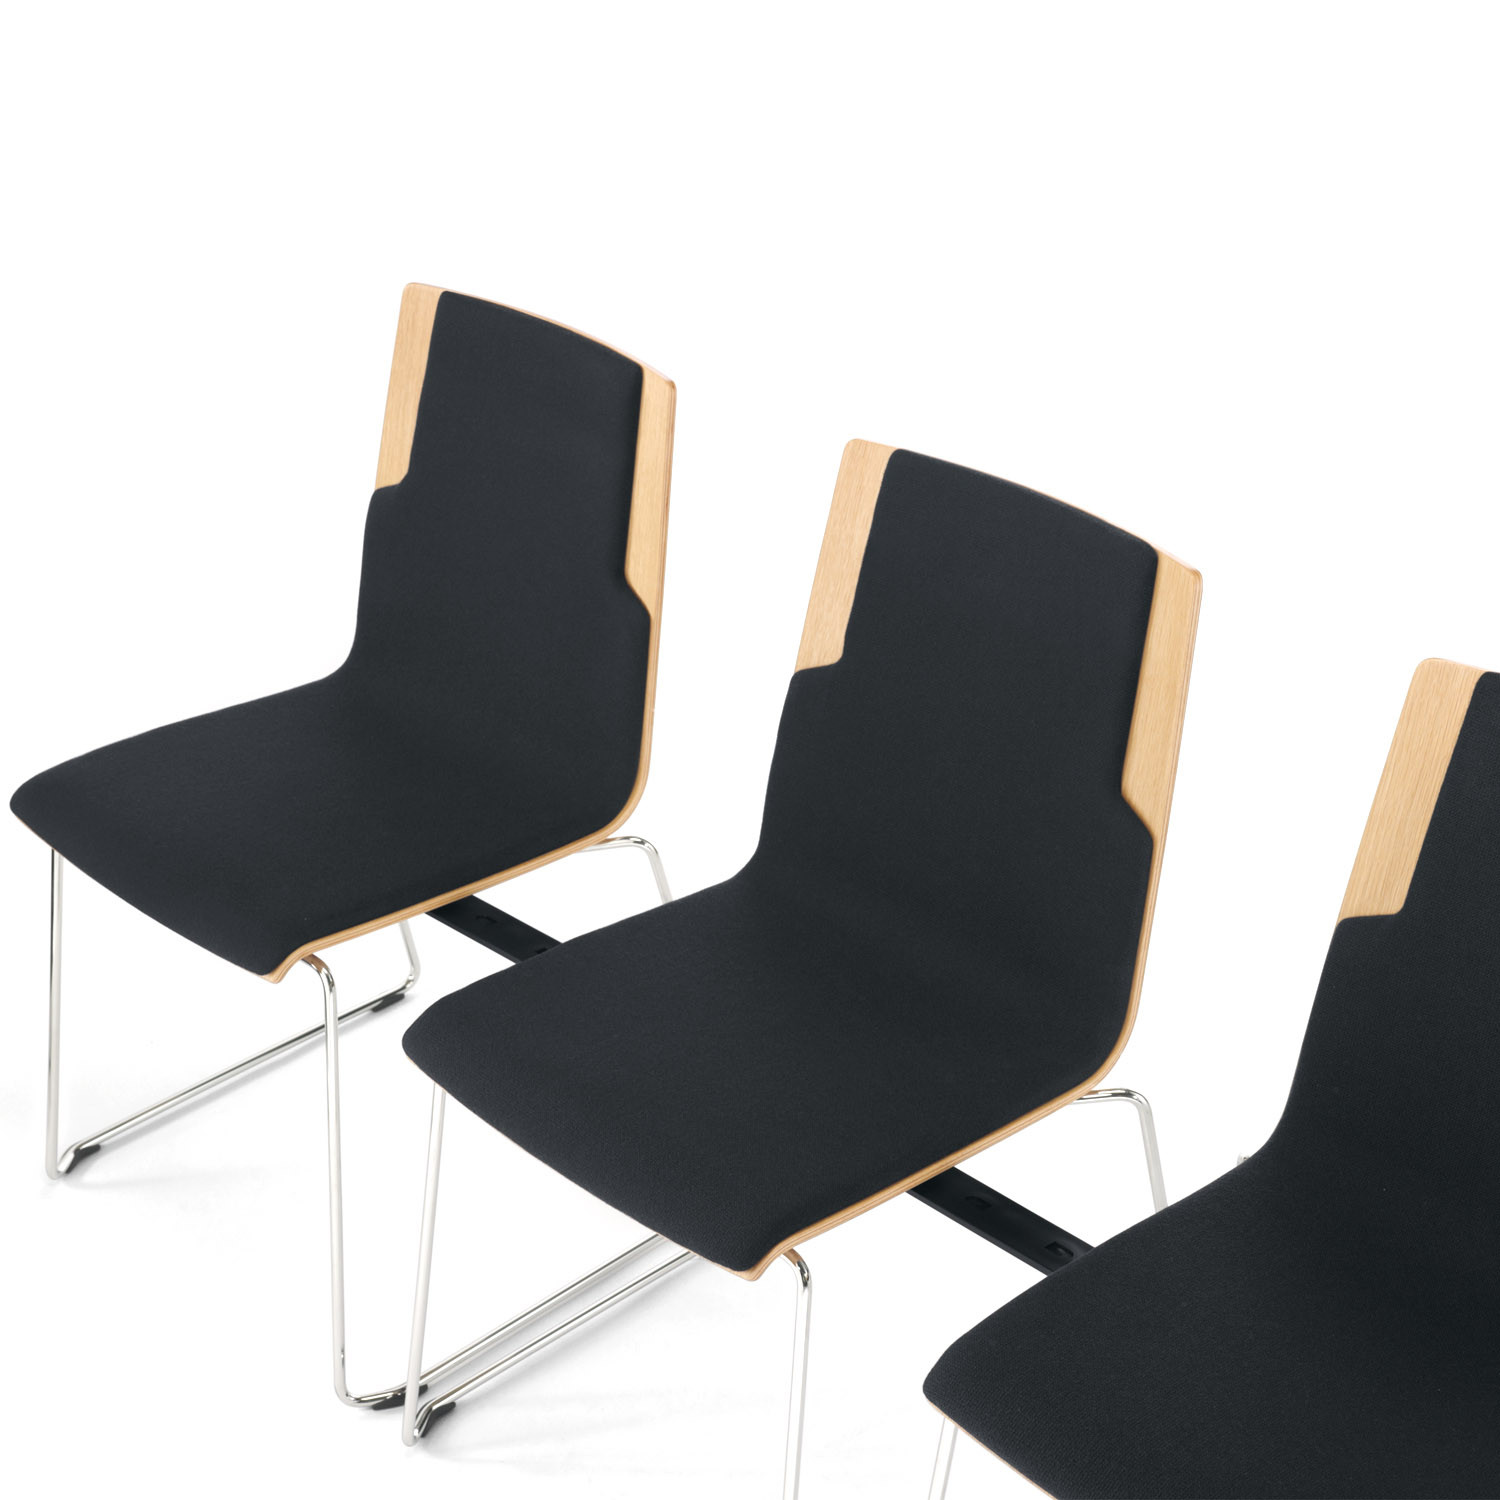 Meet Chairs - Linked Seating